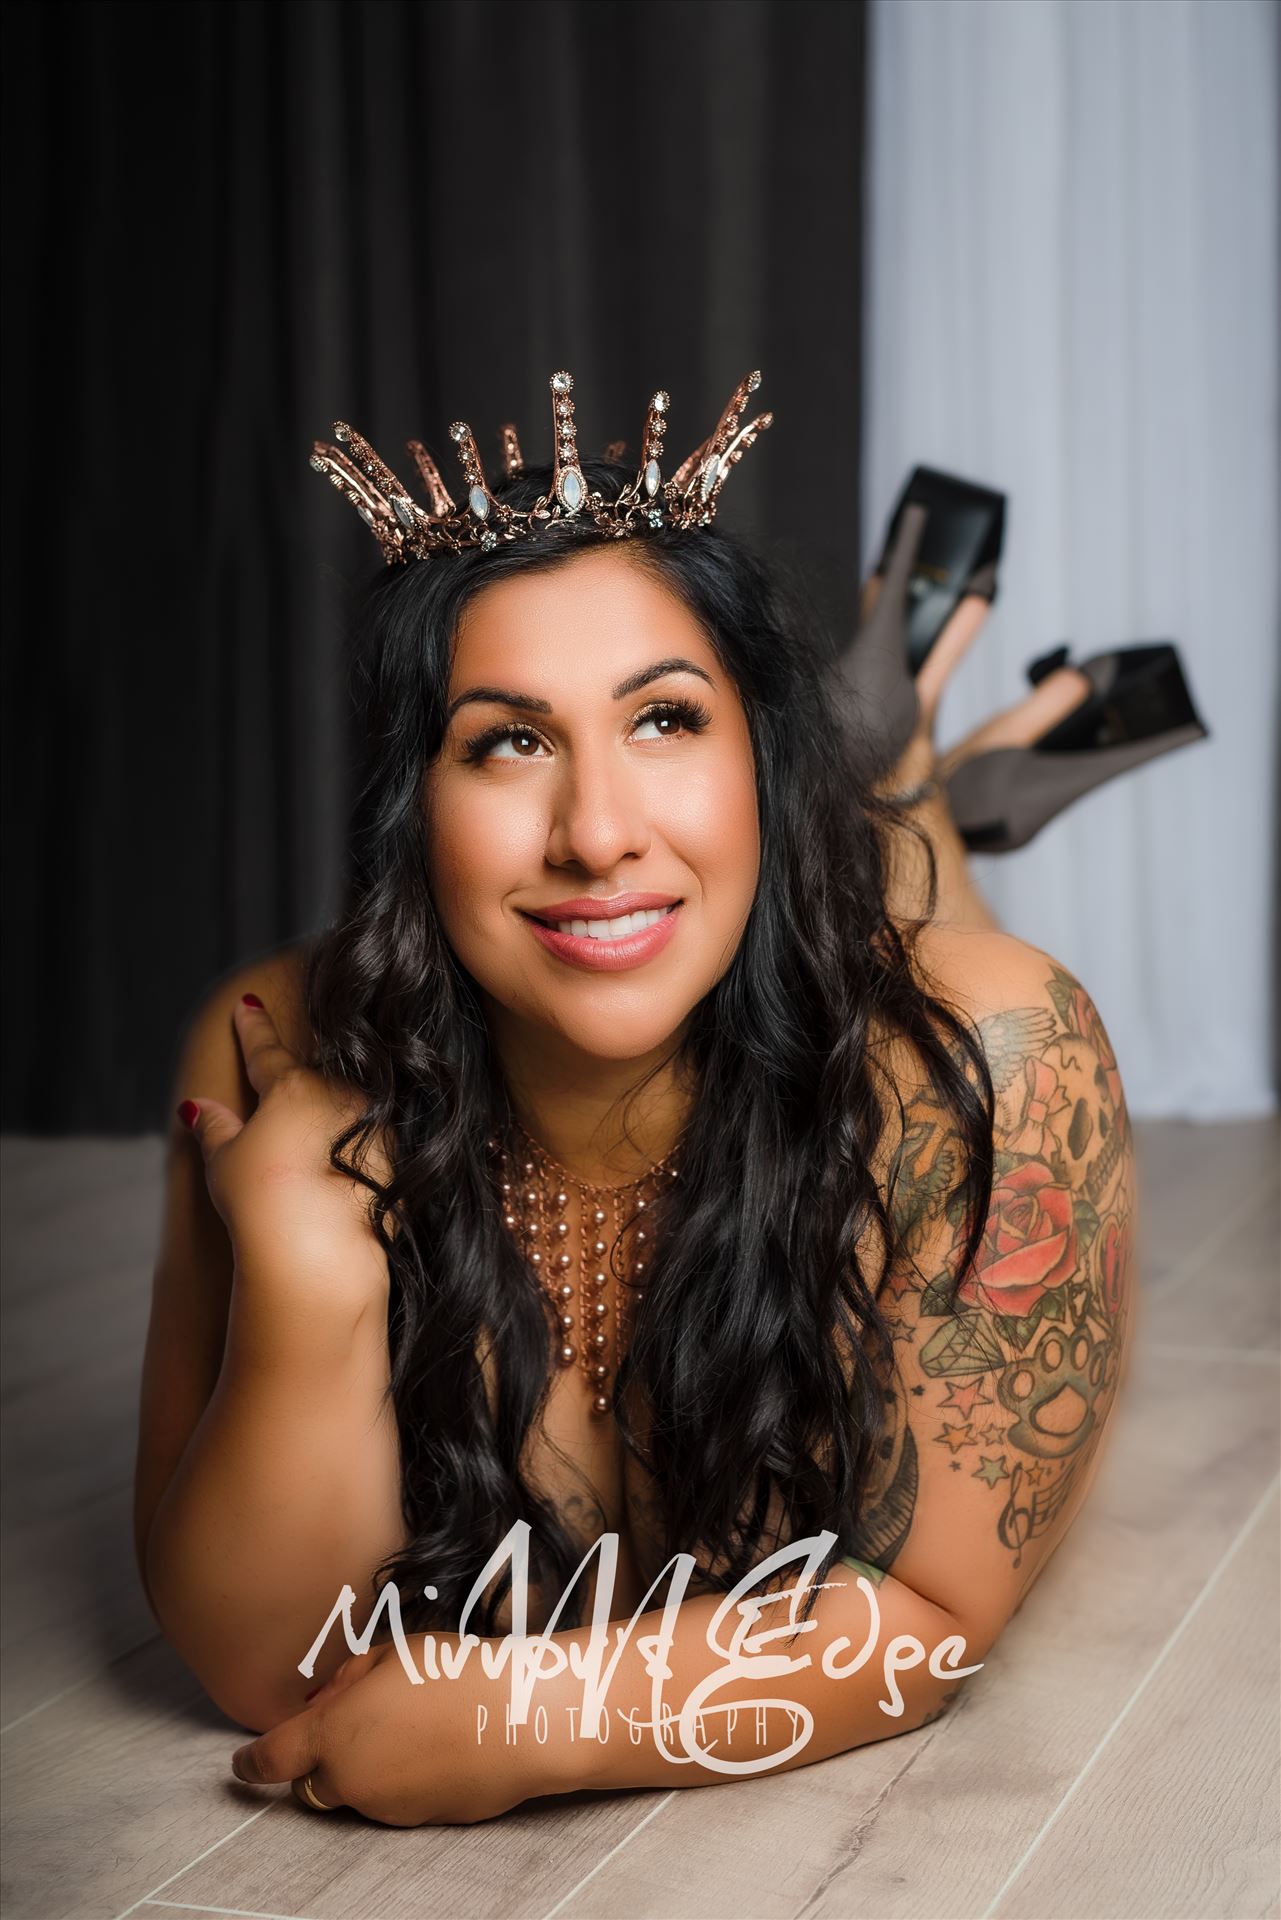 Port-9332.JPG Beachfront Boudoir by Mirror's Edge Photography is a Boutique Luxury Boudoir Photography Studio located just blocks from the beach in Oceano, California. My mission is to show as many women as possible how beautiful they truly are! by Sarah Williams